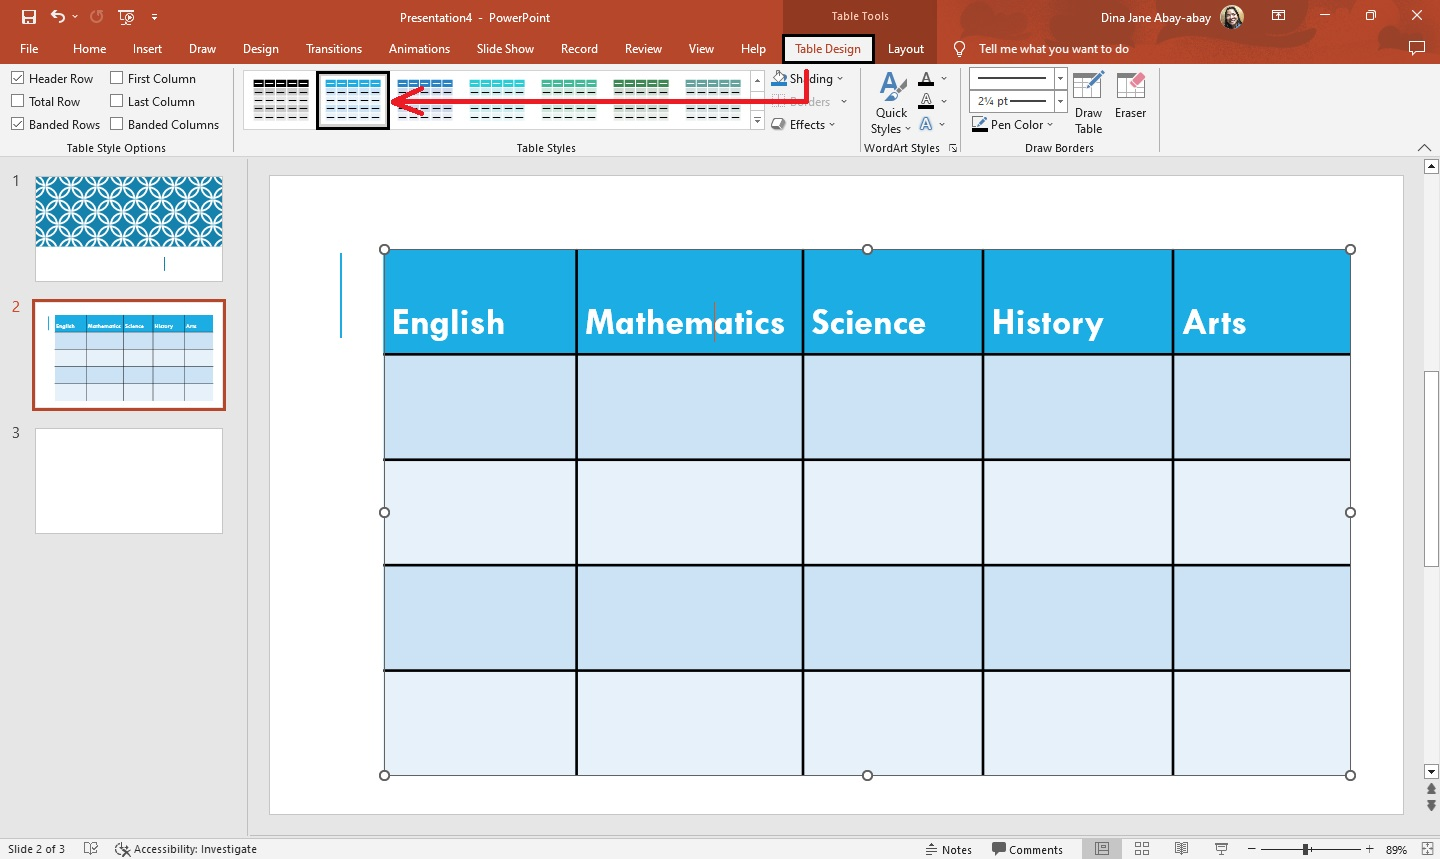 To customize your table, go to the "table design" and select a specific color or design for your PowerPoint table